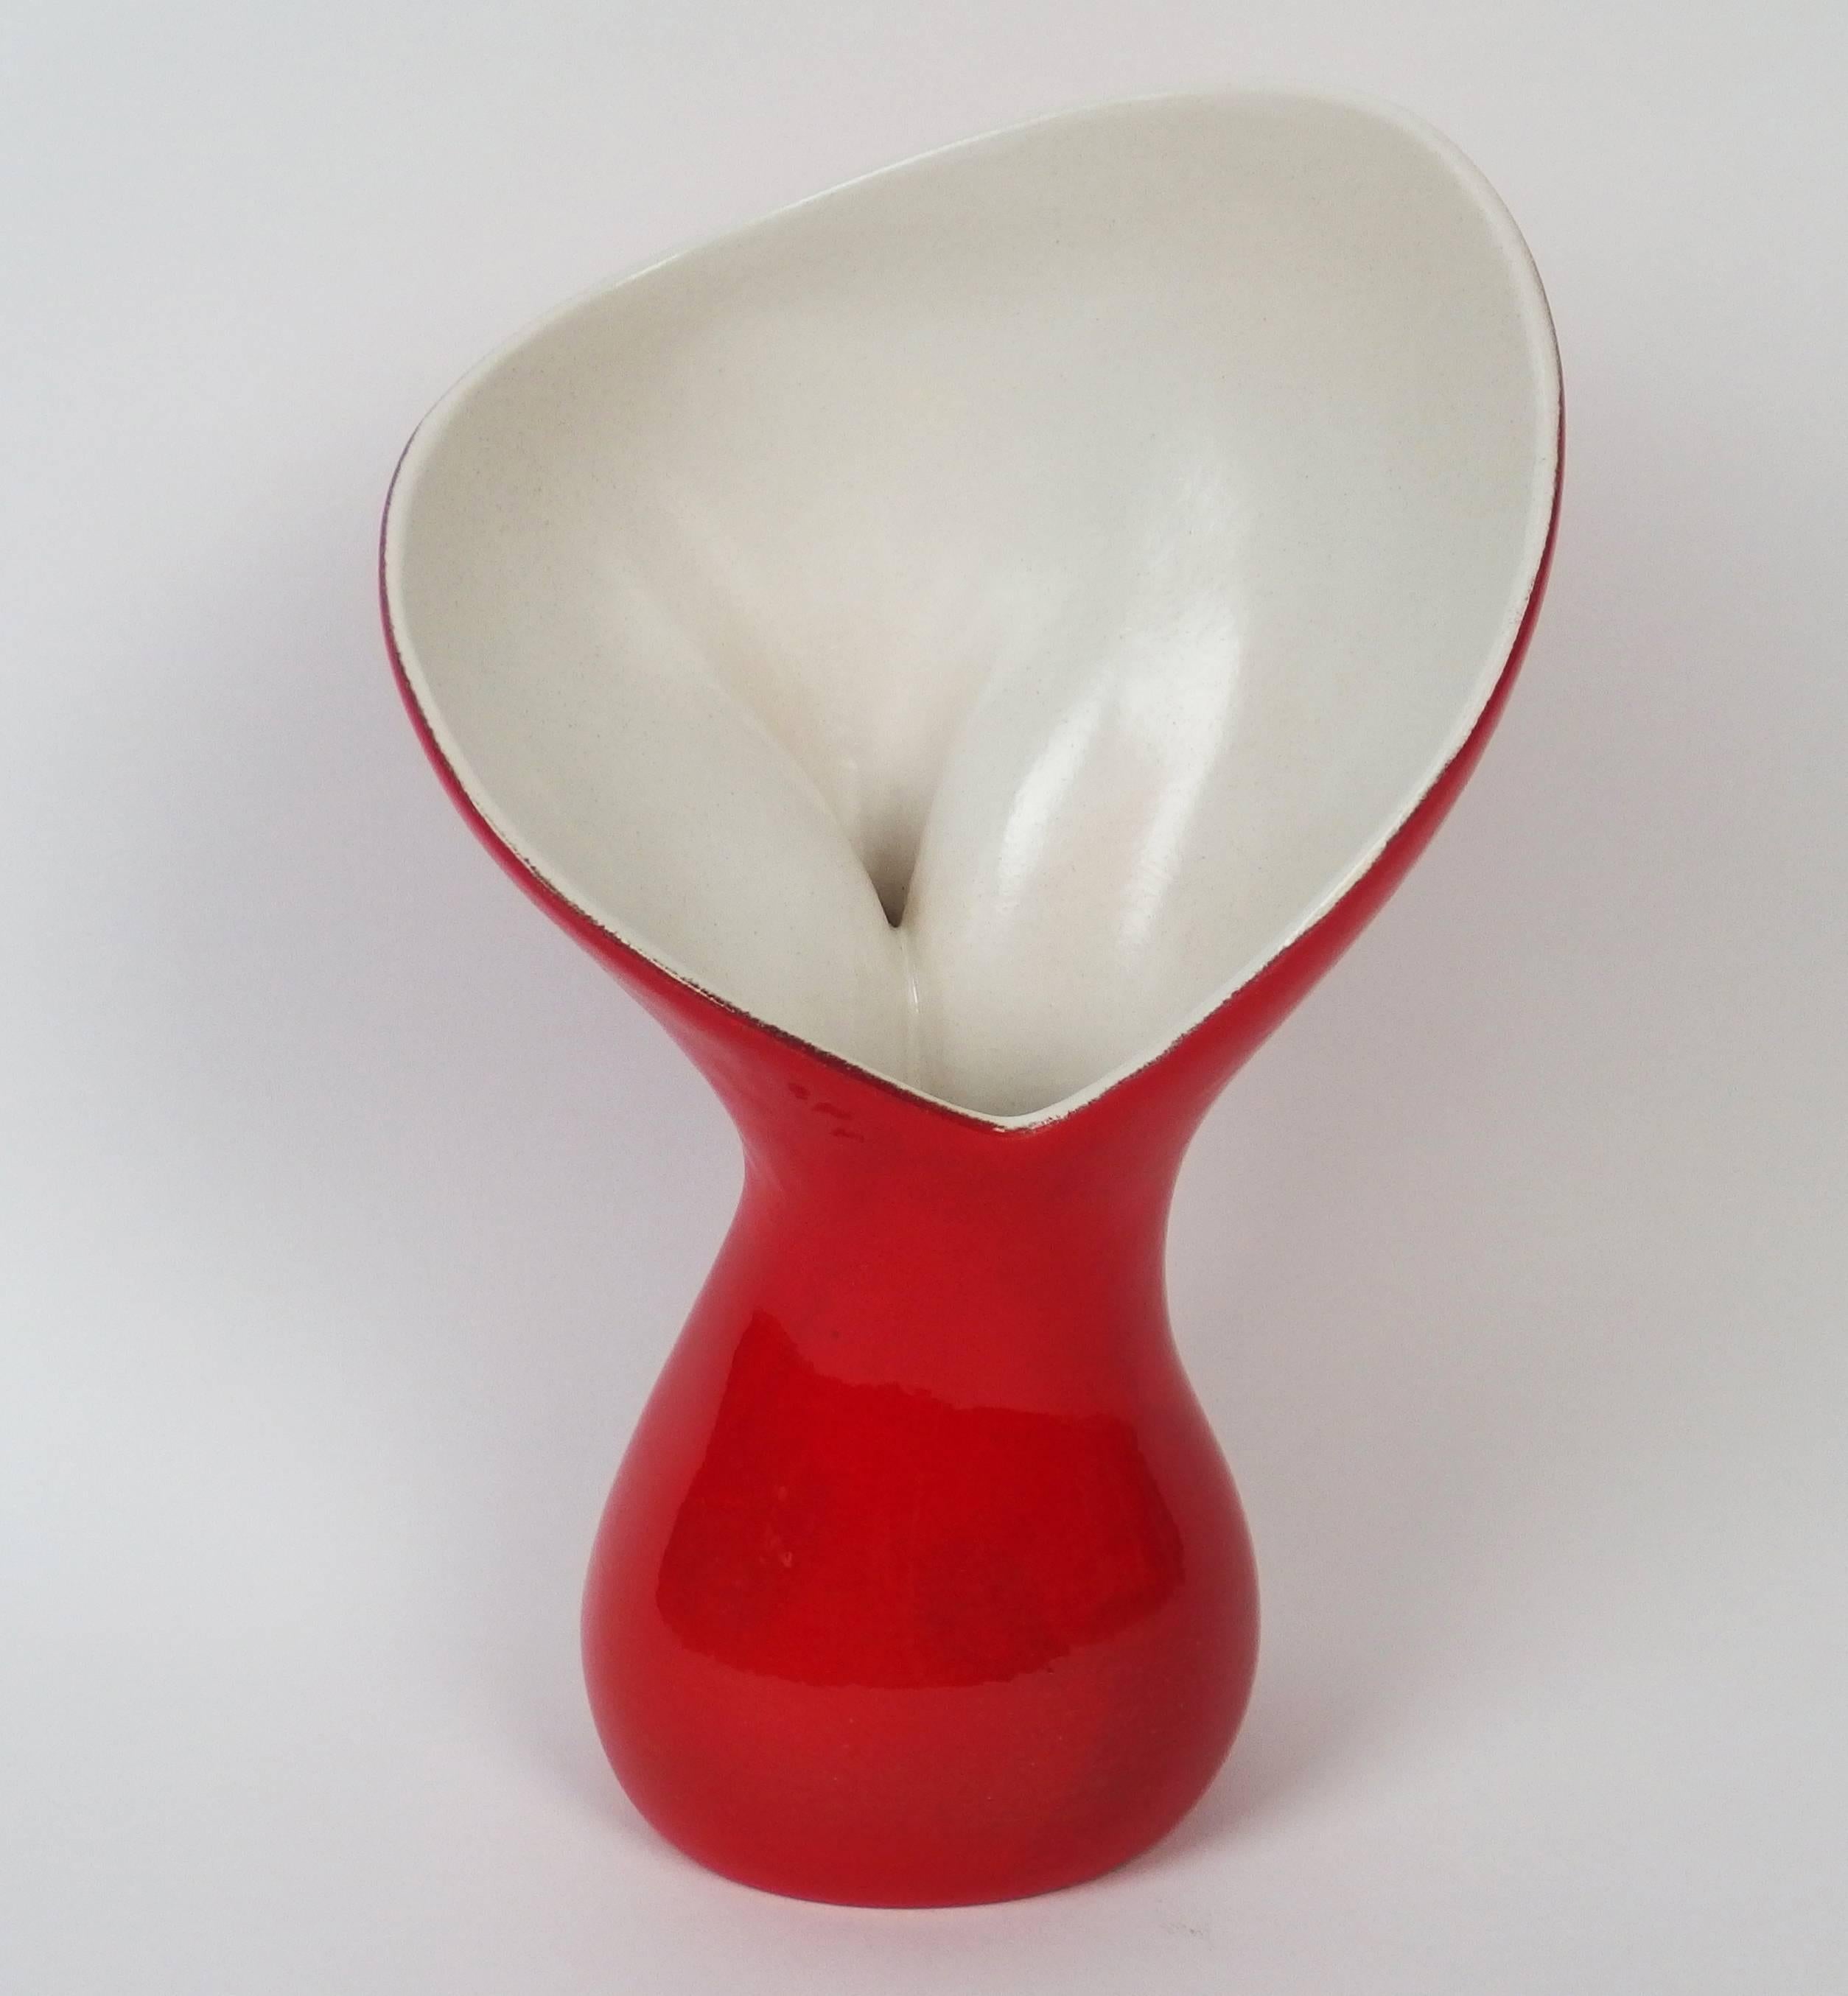 "1046" Nervure vase with a bright red glaze outside and a white satin glaze inside. Engraved signature on the back: 1046 poterie Pol Chambost Made in France s.
This vase belongs to wide neck "corolla" vases series created in the